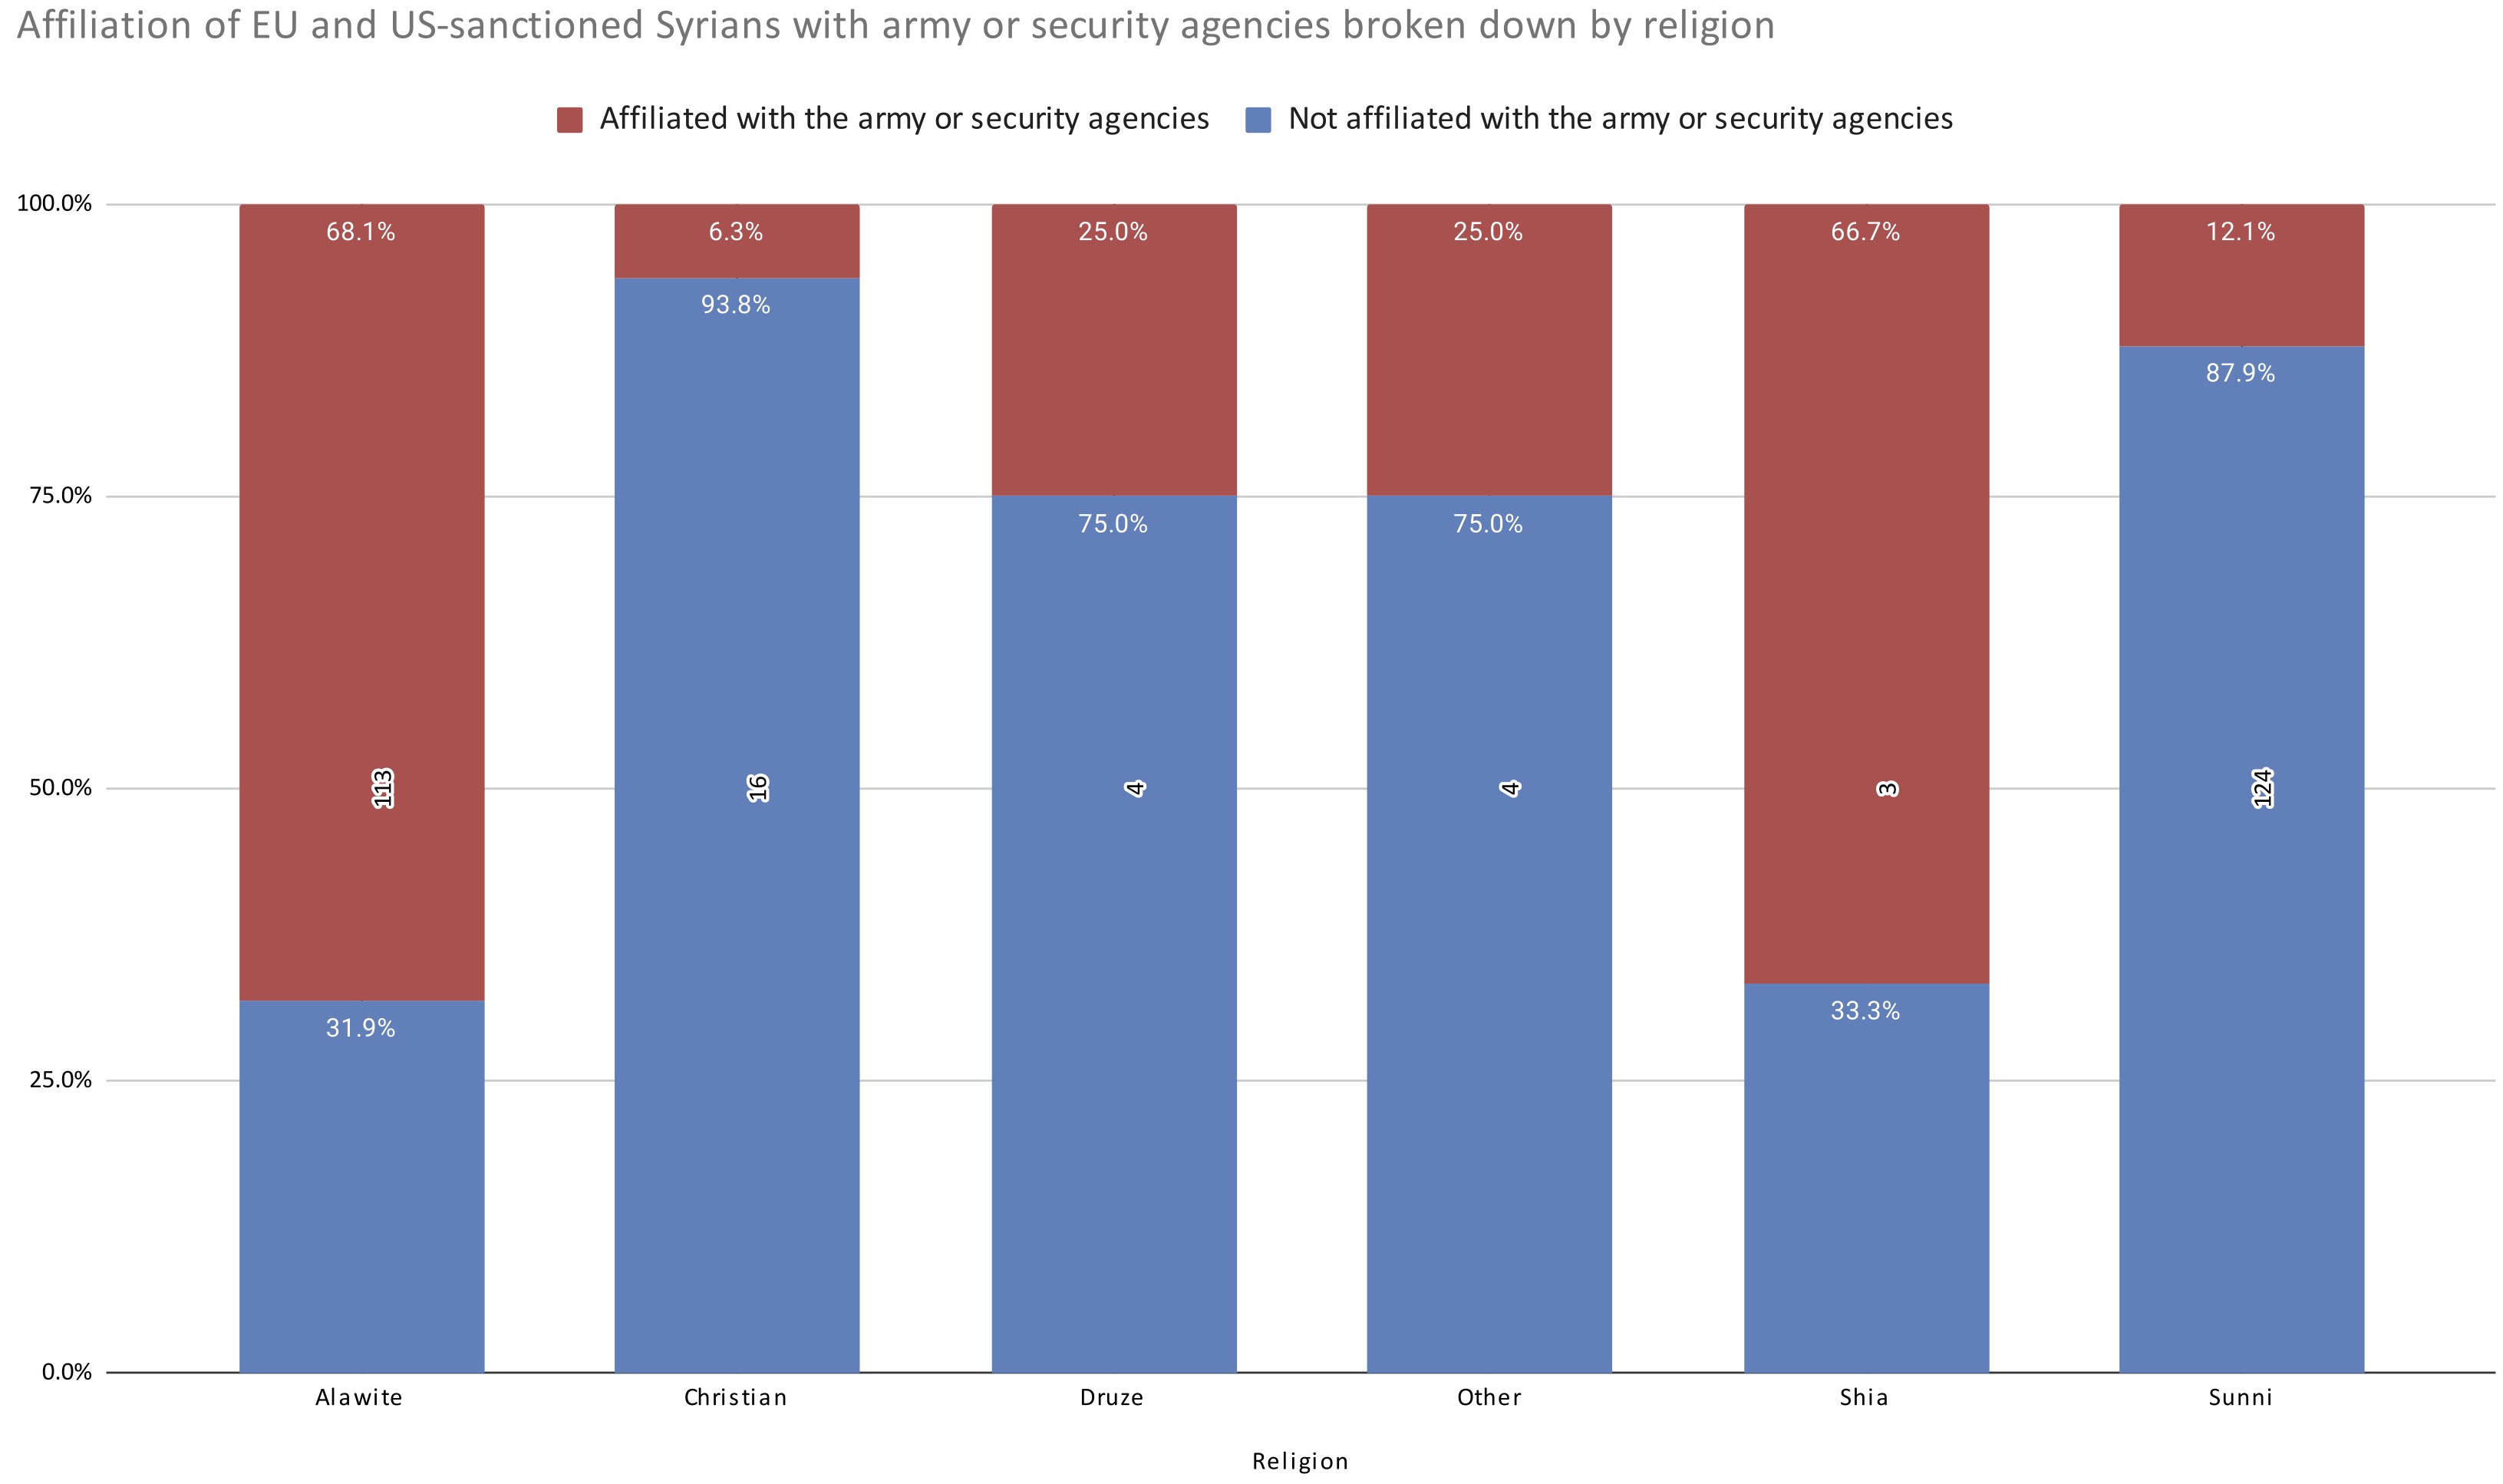 Figure 3: Affiliation of EU- and US-sanctioned Syrians with army or security agencies broken down by religion.  Note that total counts per religion/sect are shown in the middle of the bars.